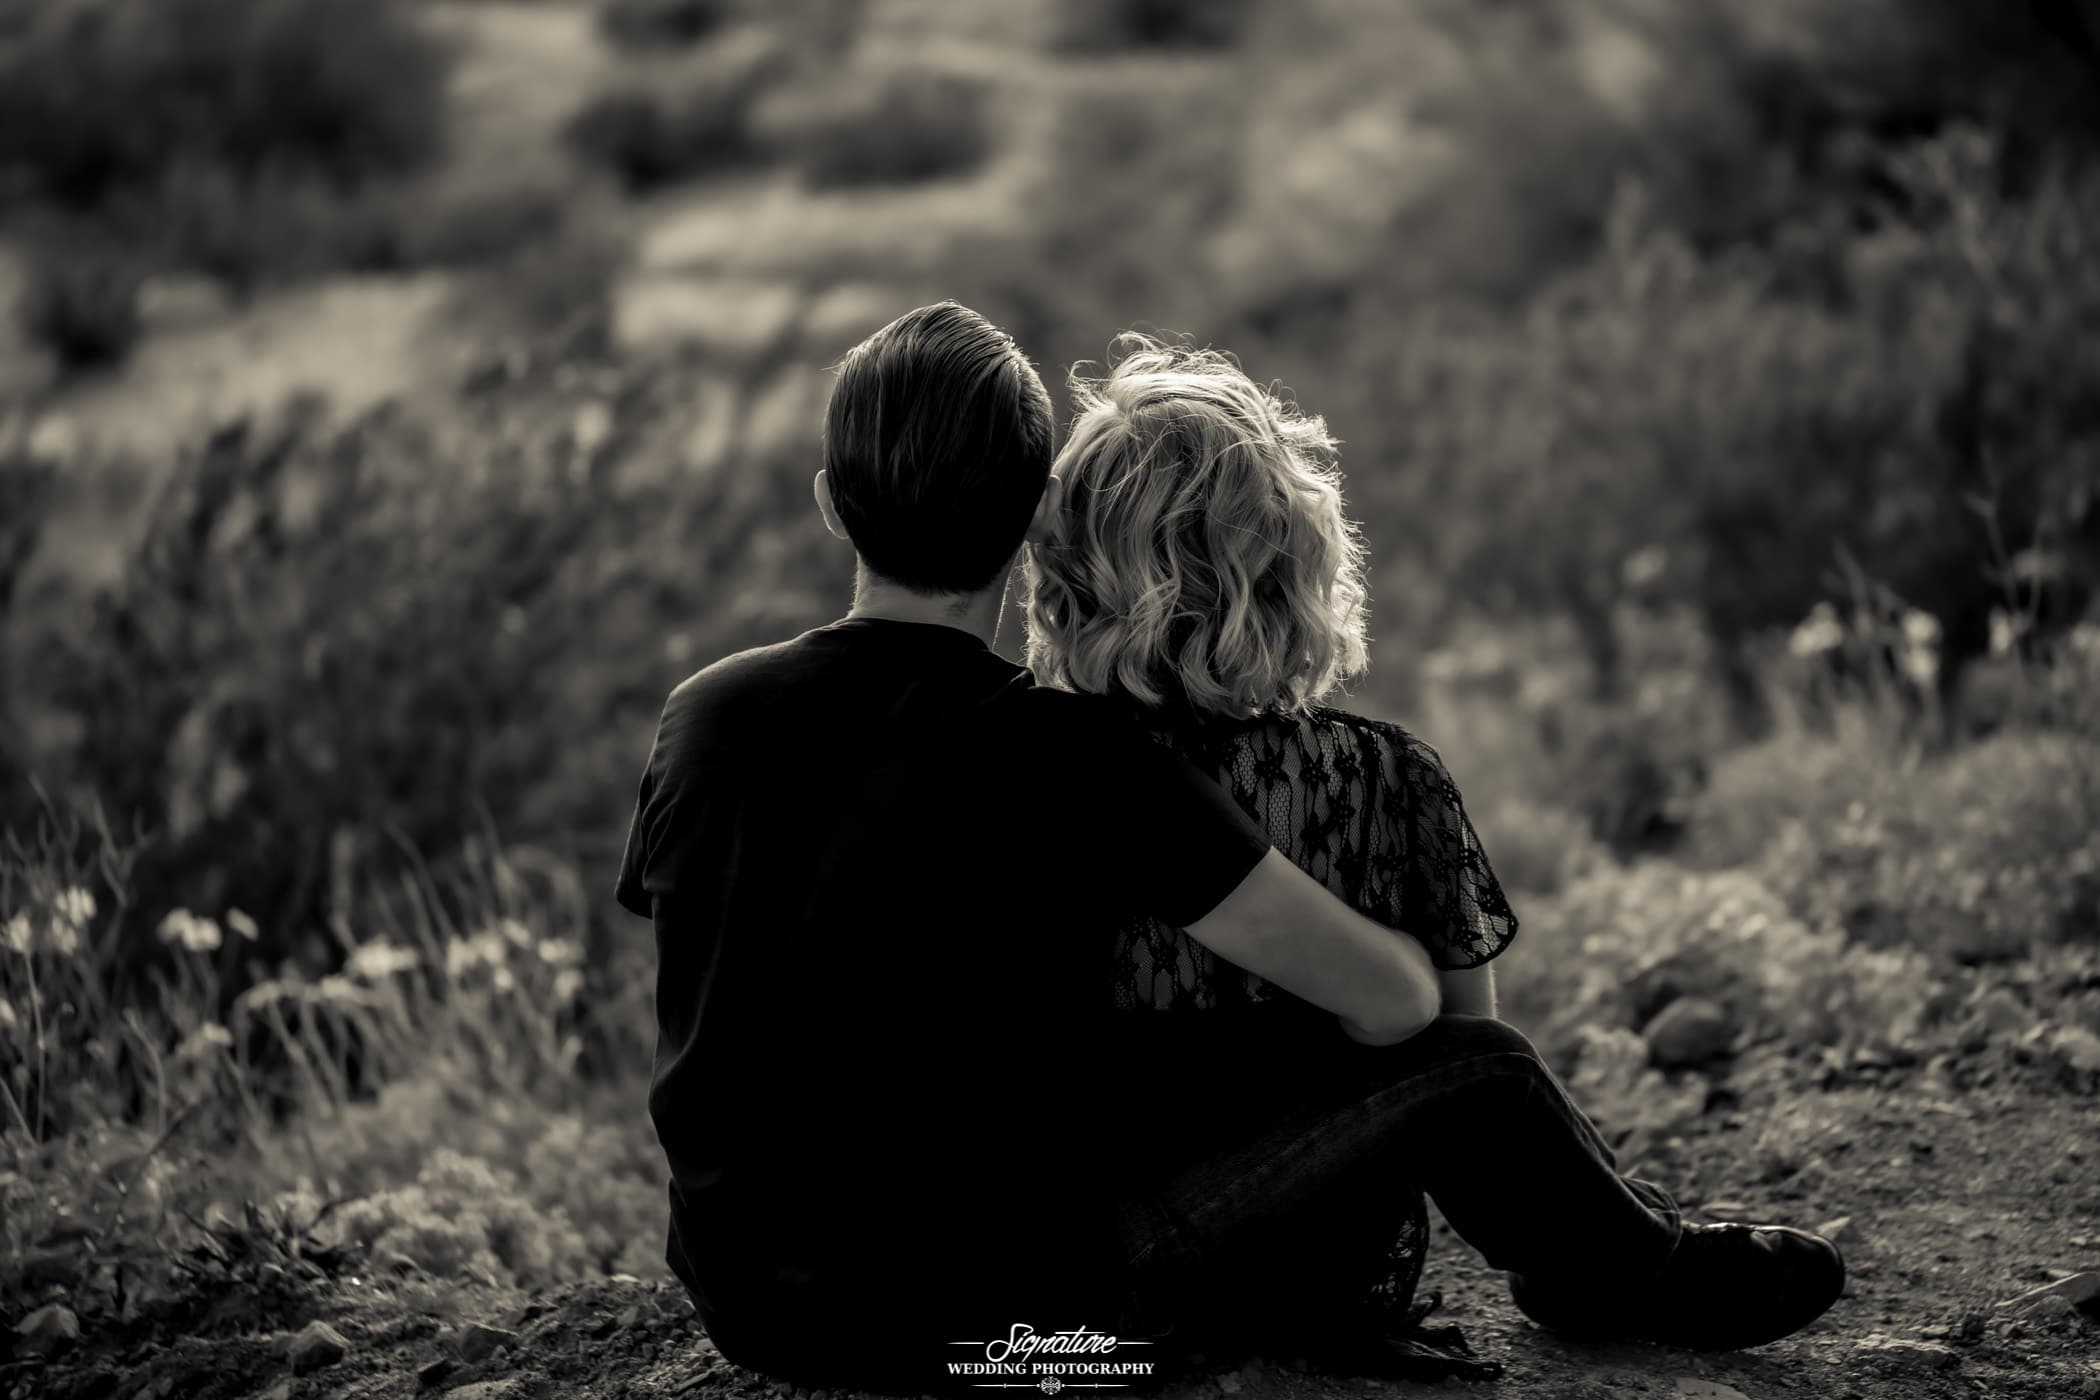 Behind shot of couple sitting together in desert black and white